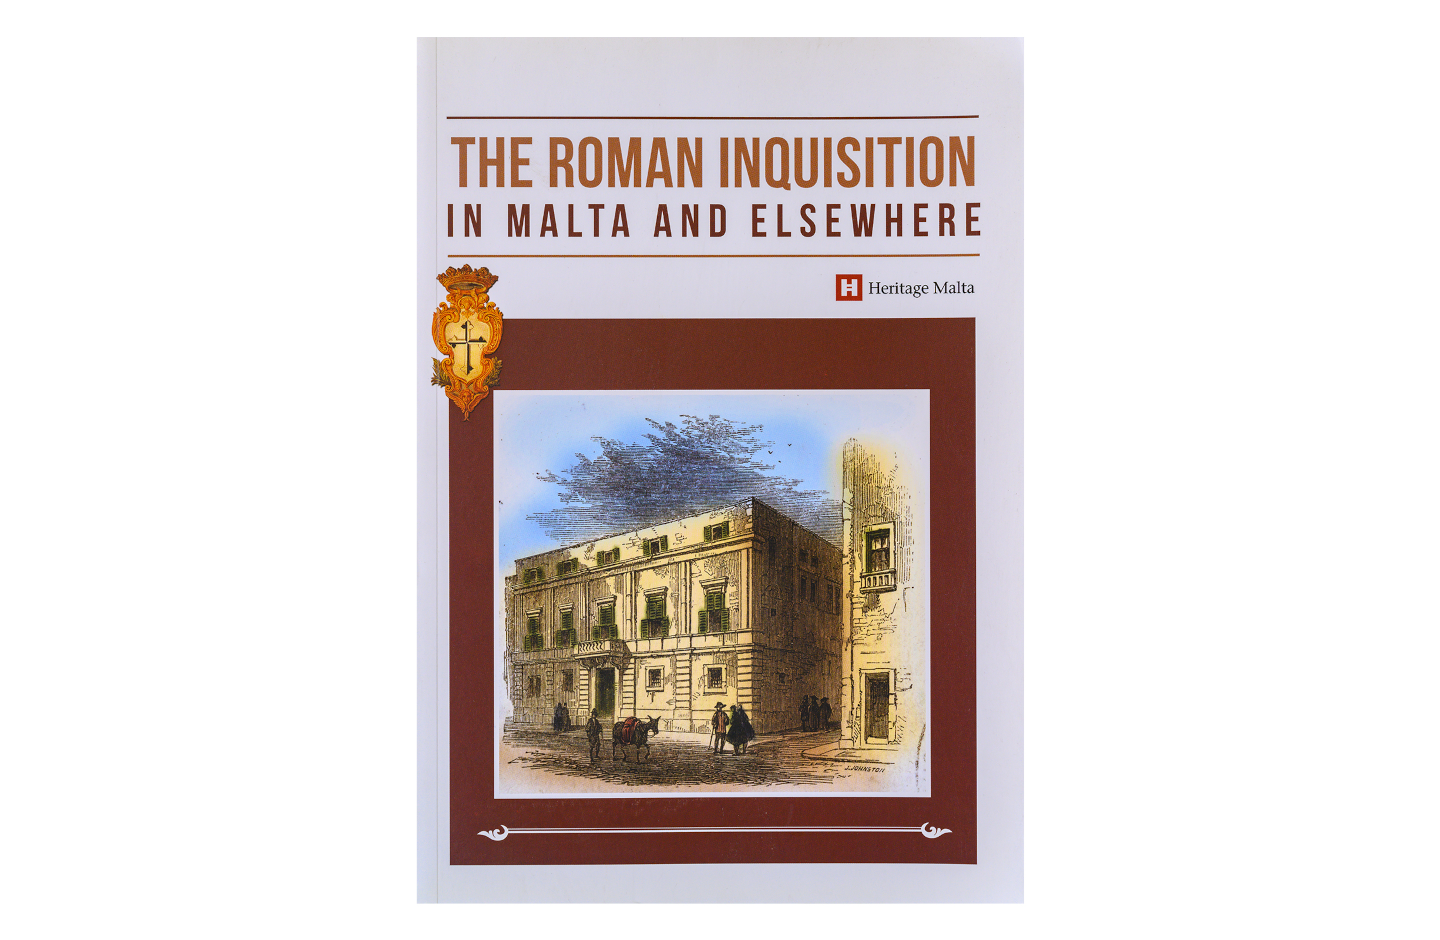 The Roman Inquisition in Malta and Elsewhere